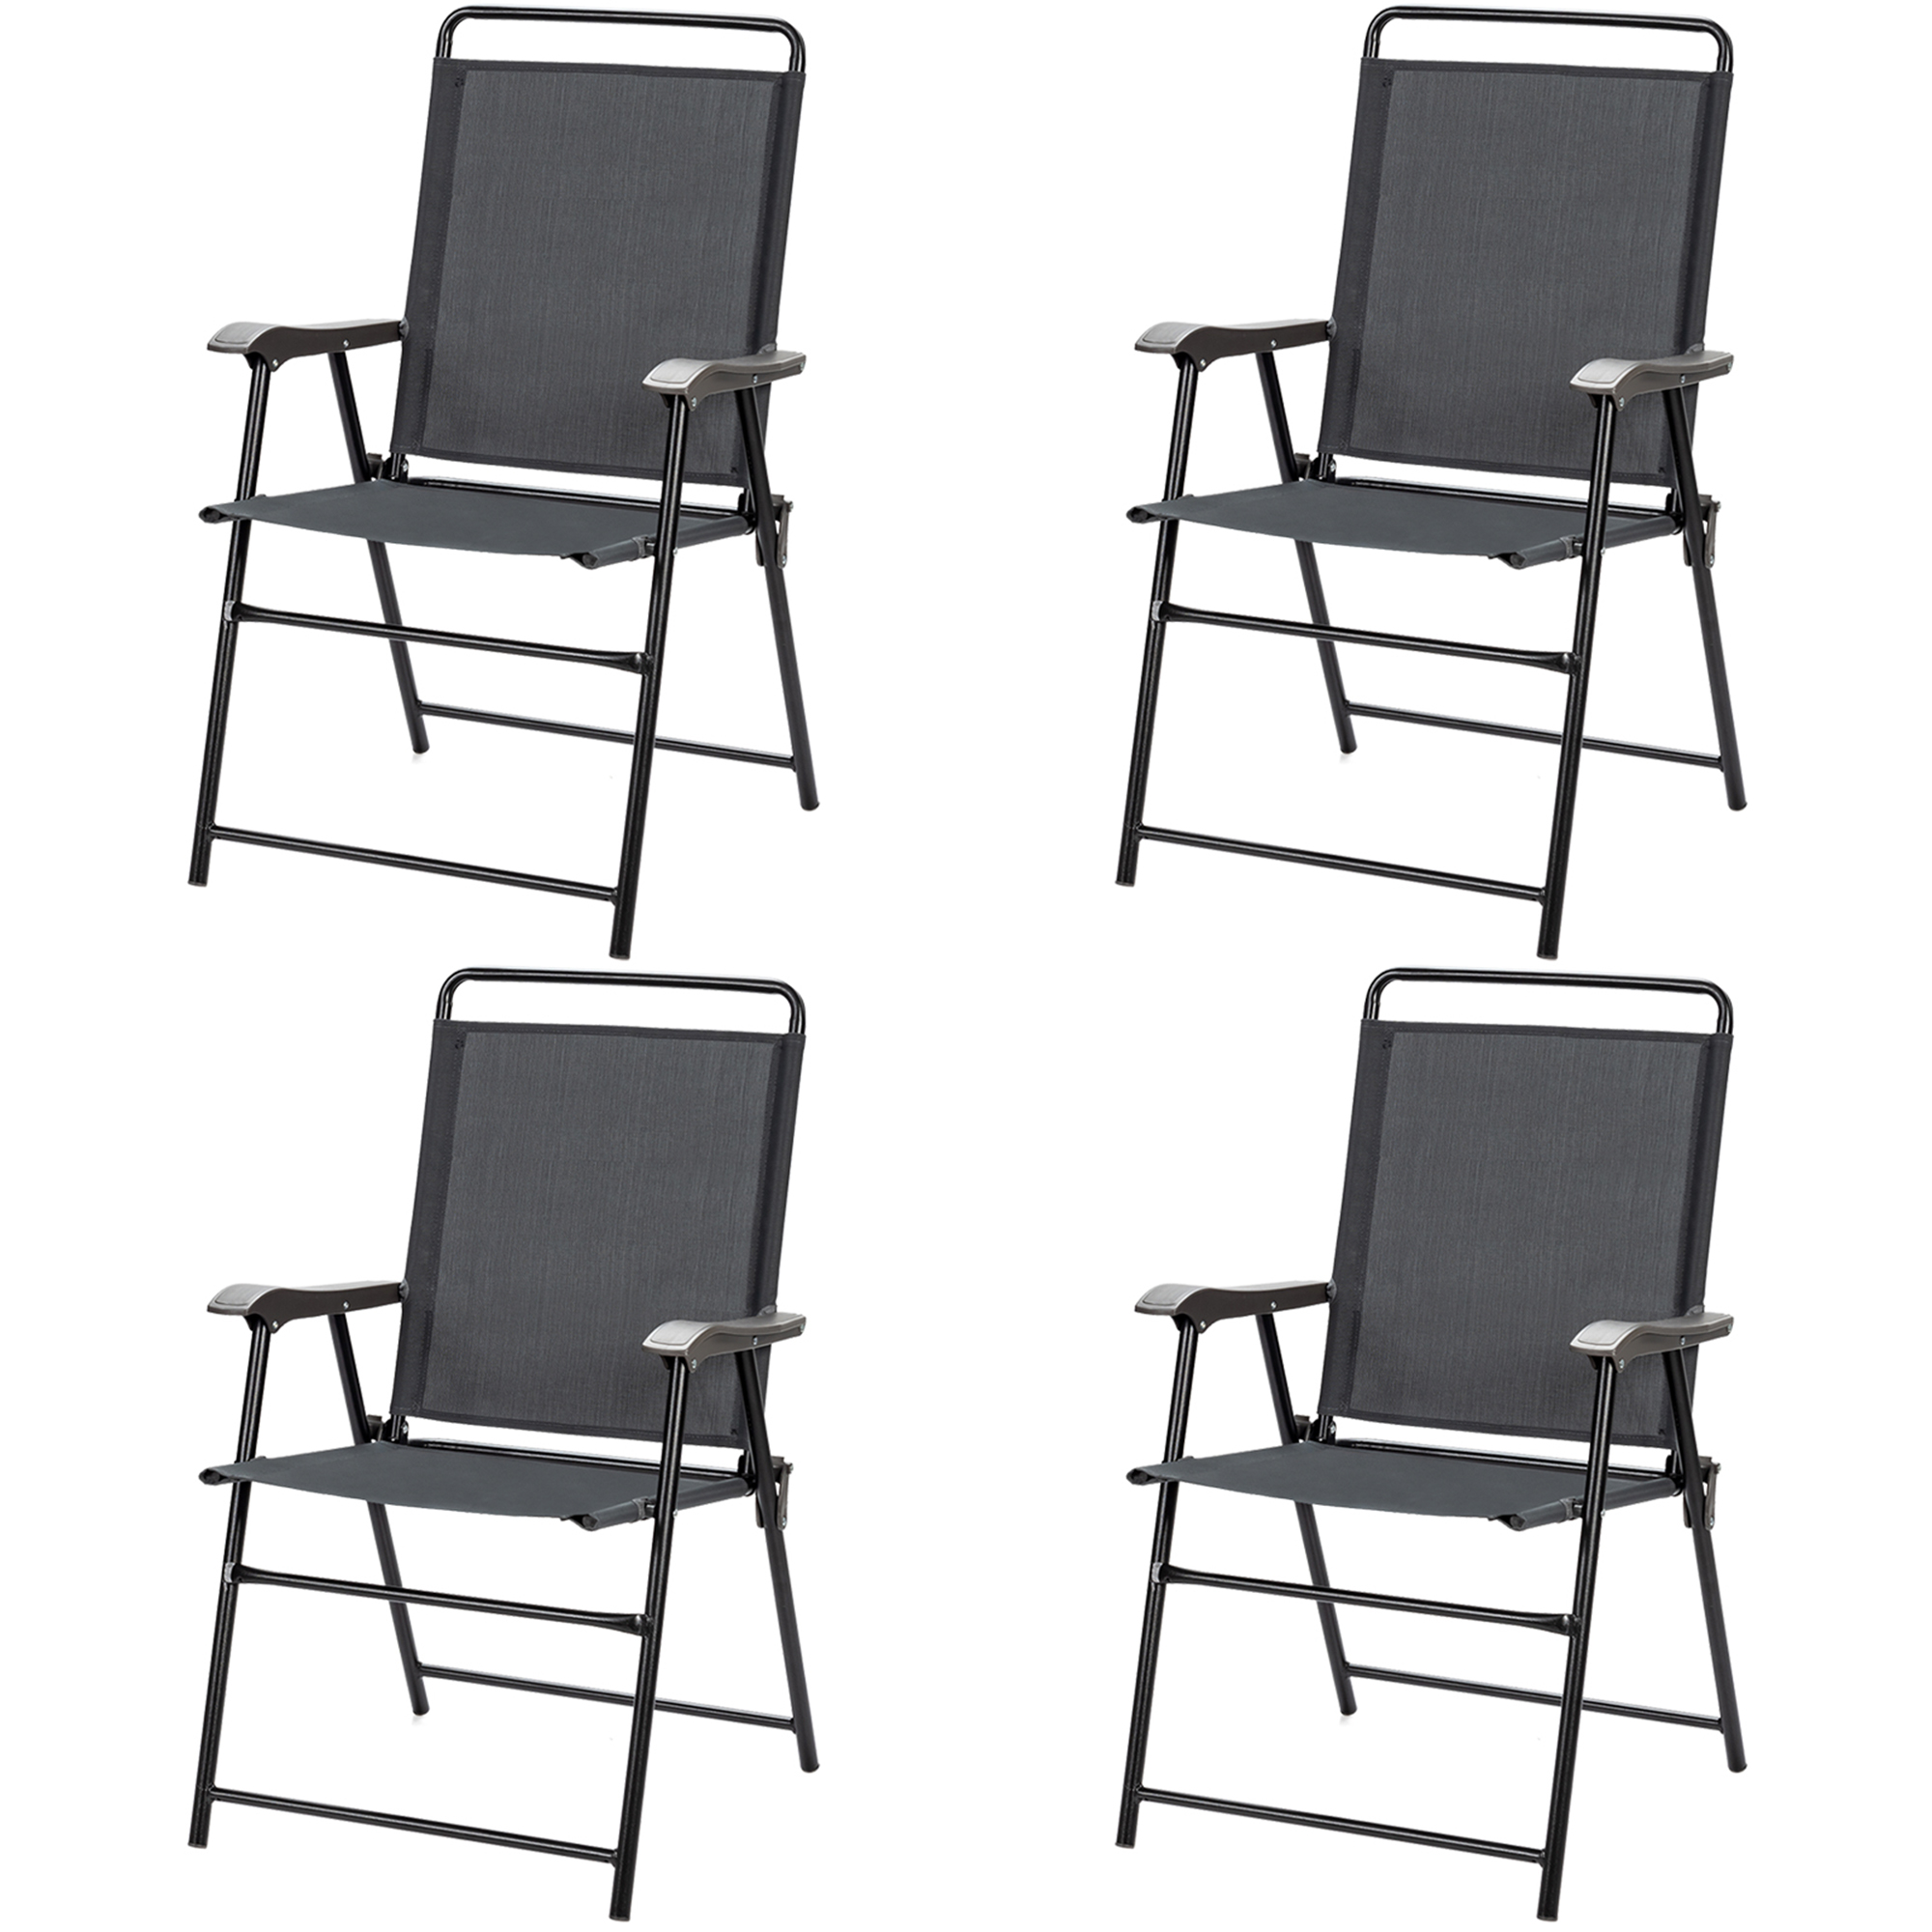 Gymax Set of 4 Folding Patio Chair Portable Sling Chair Yard Garden Outdoor - image 1 of 10